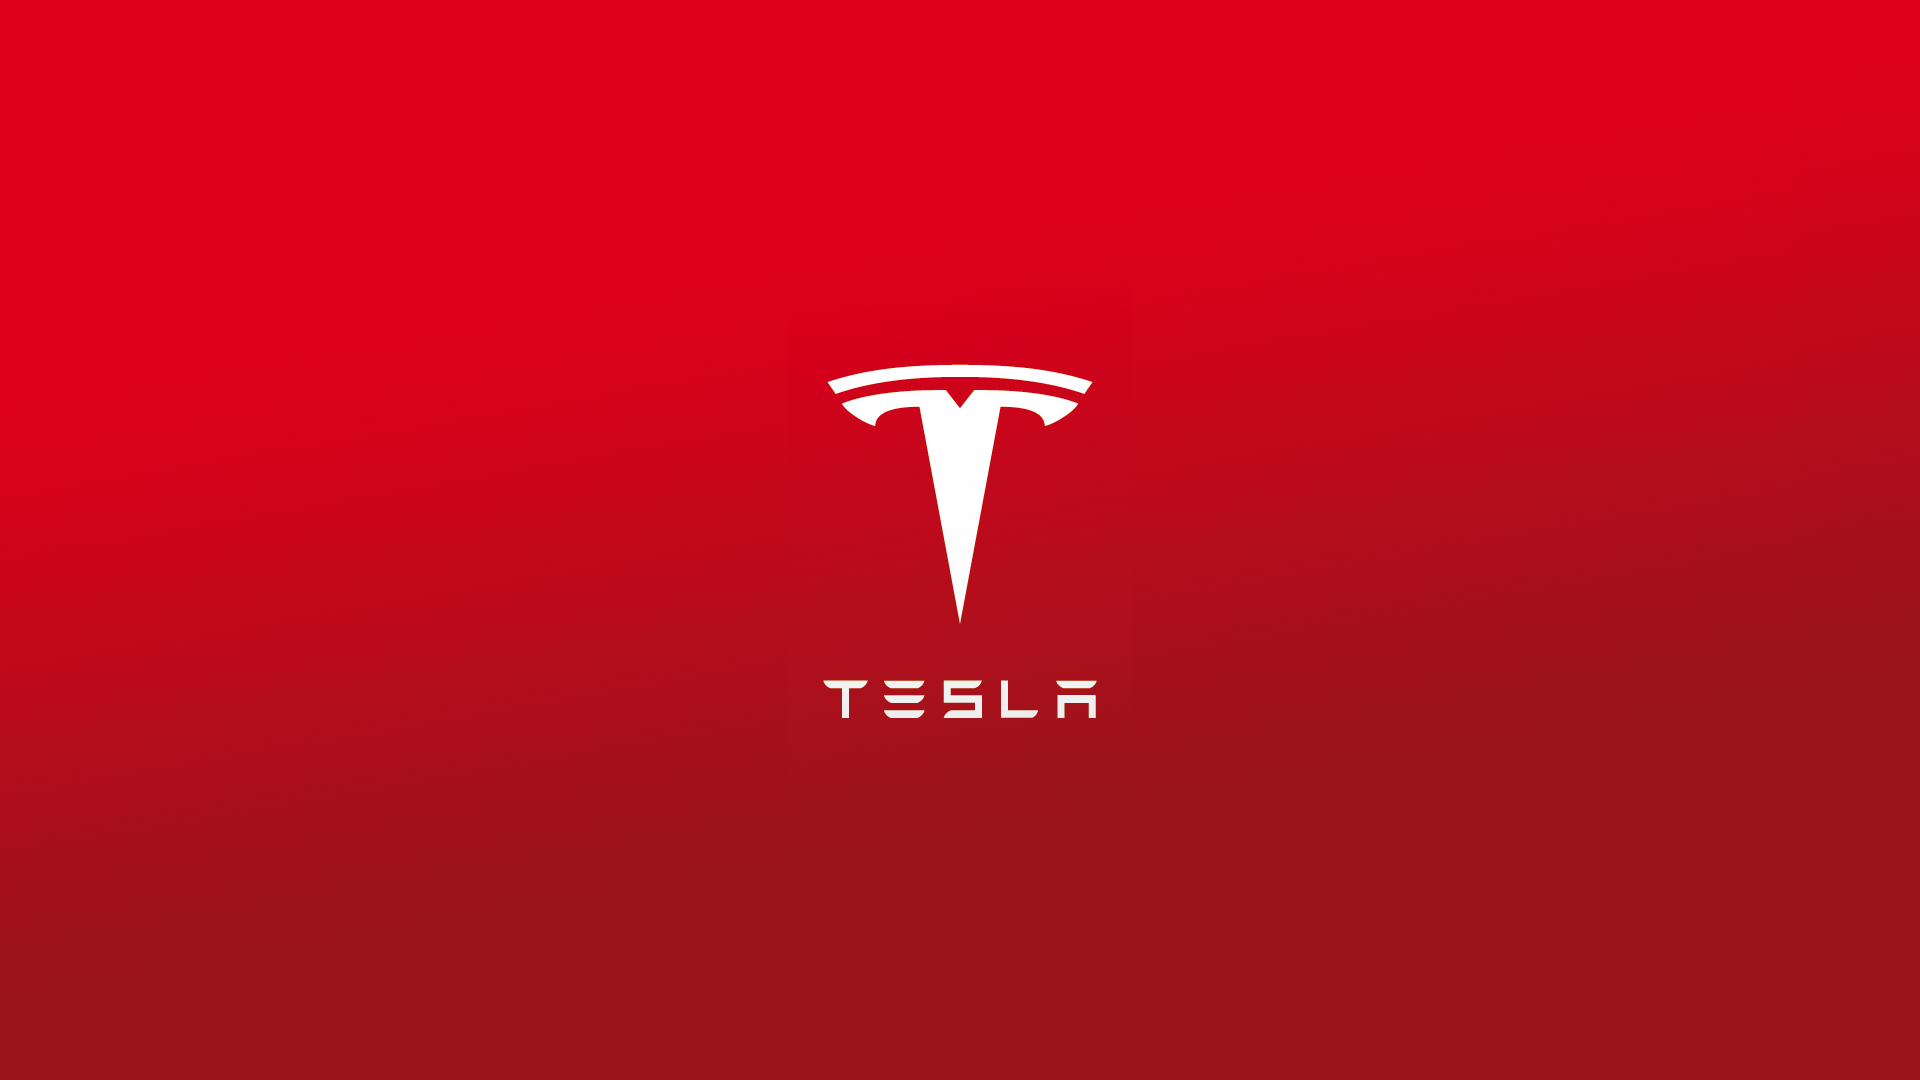 Tesla Car Logo with Red Background Wallpaper   Wallpaper Stream